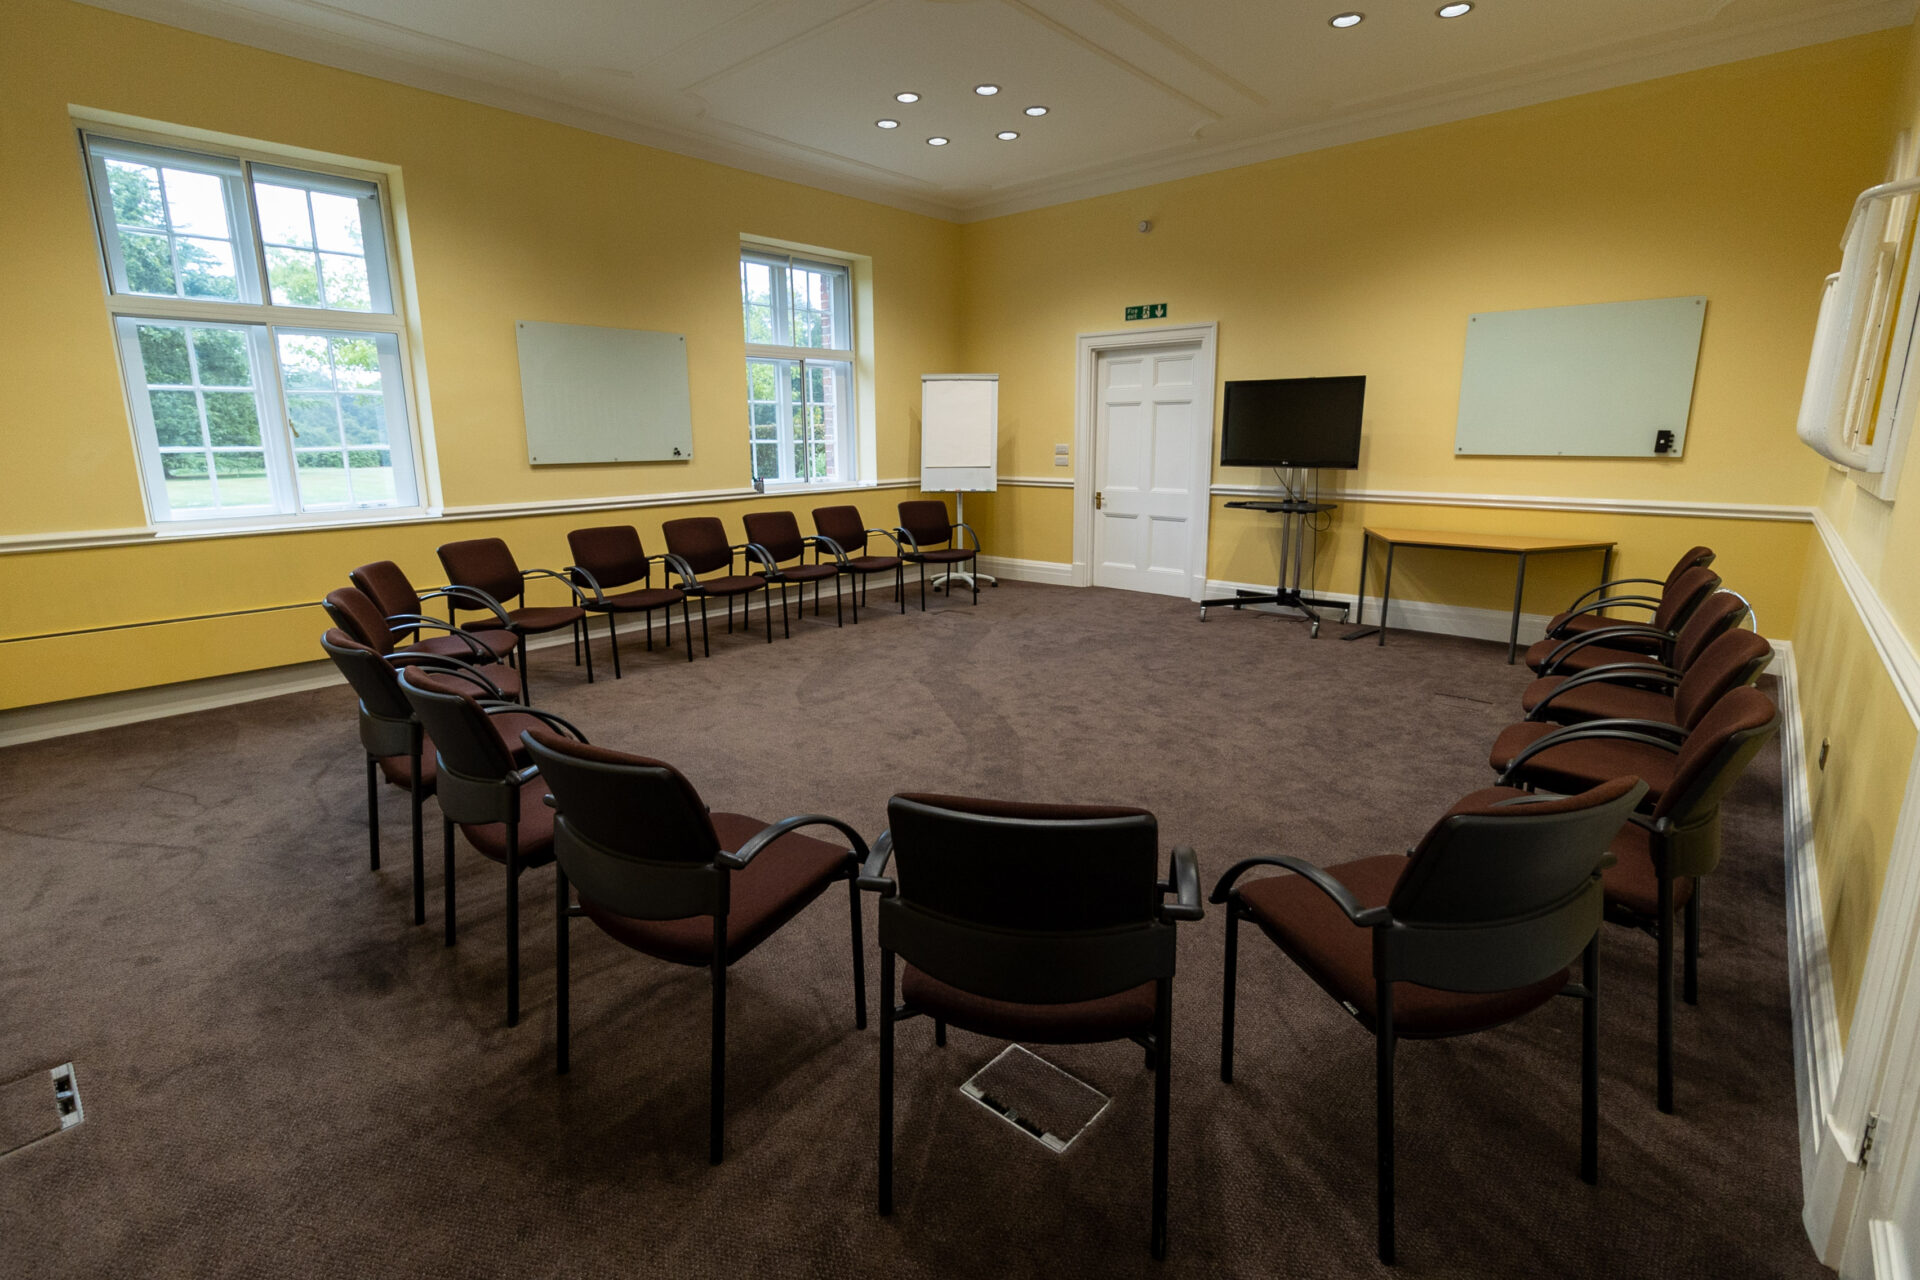 The Greening conference room, laid out in a U-shape to accommodate up to 16 people.